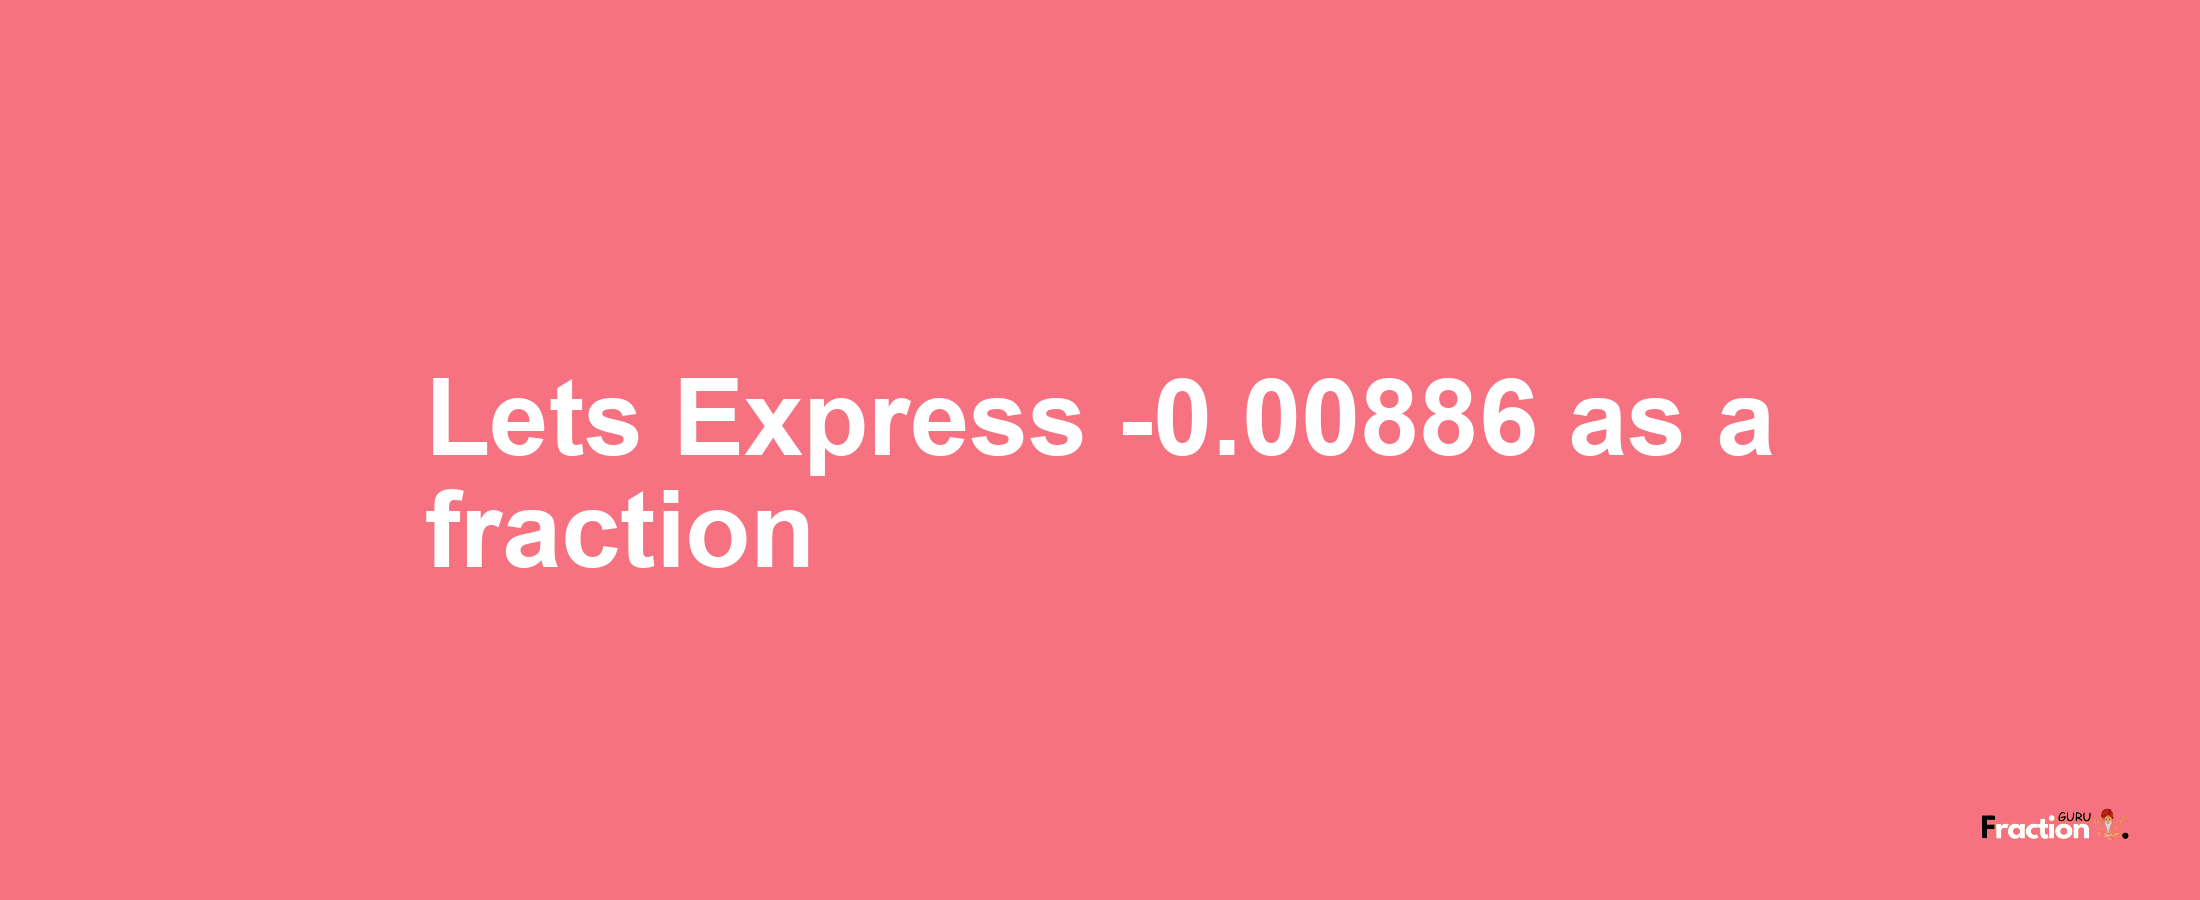 Lets Express -0.00886 as afraction